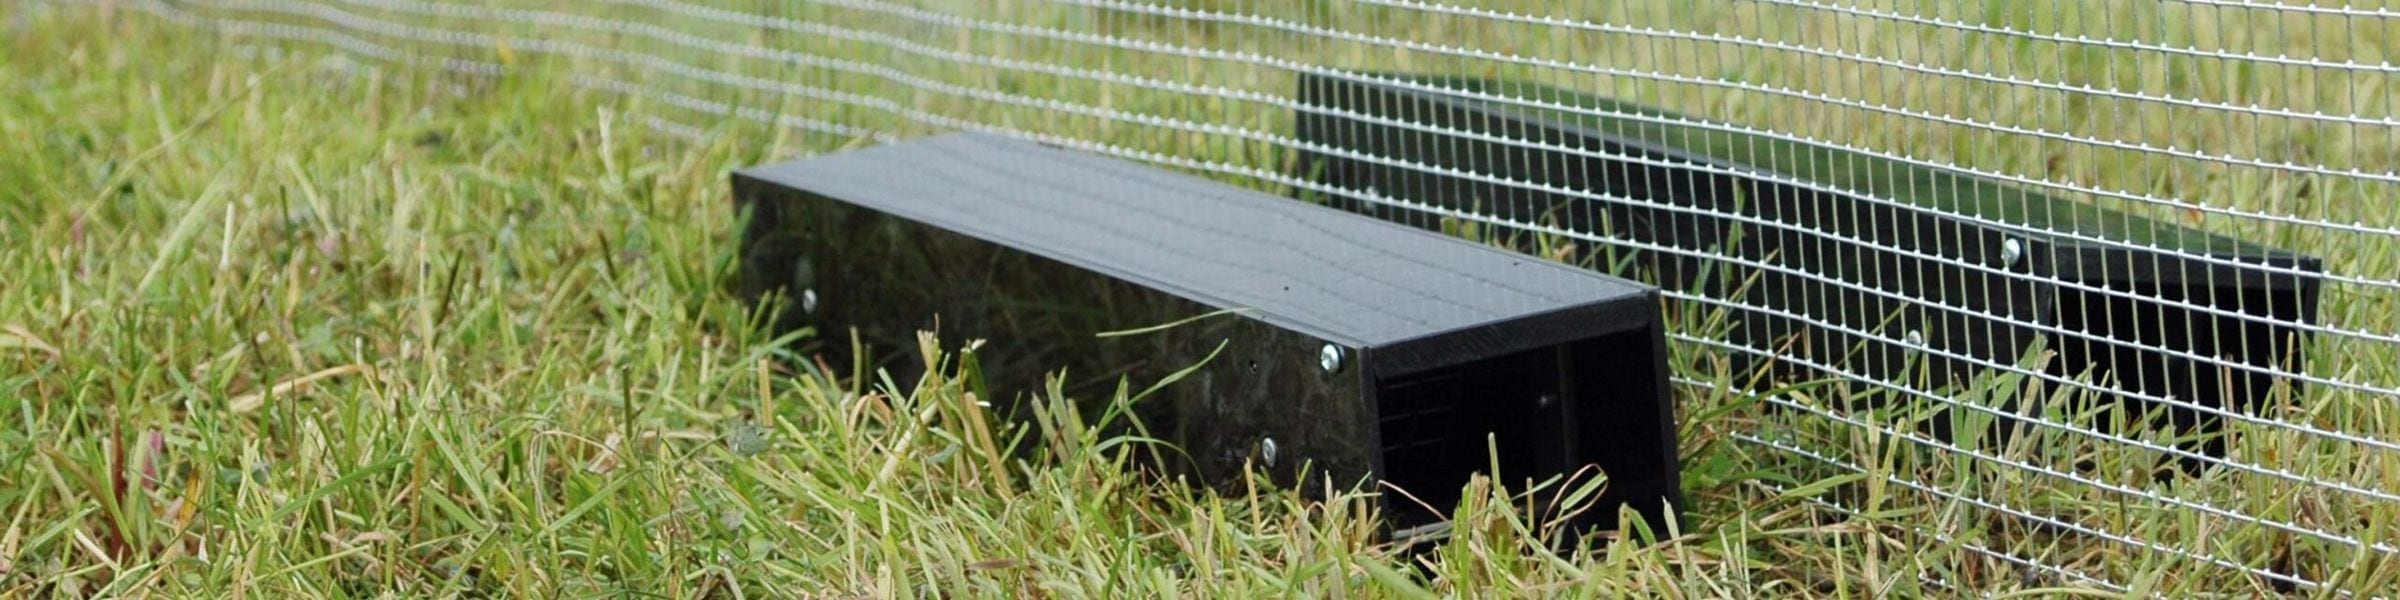 TopCat Vole/Mouse Trap From Switzerland. The Best Vole Trap I Have Ever  Tested. Mousetrap Monday 